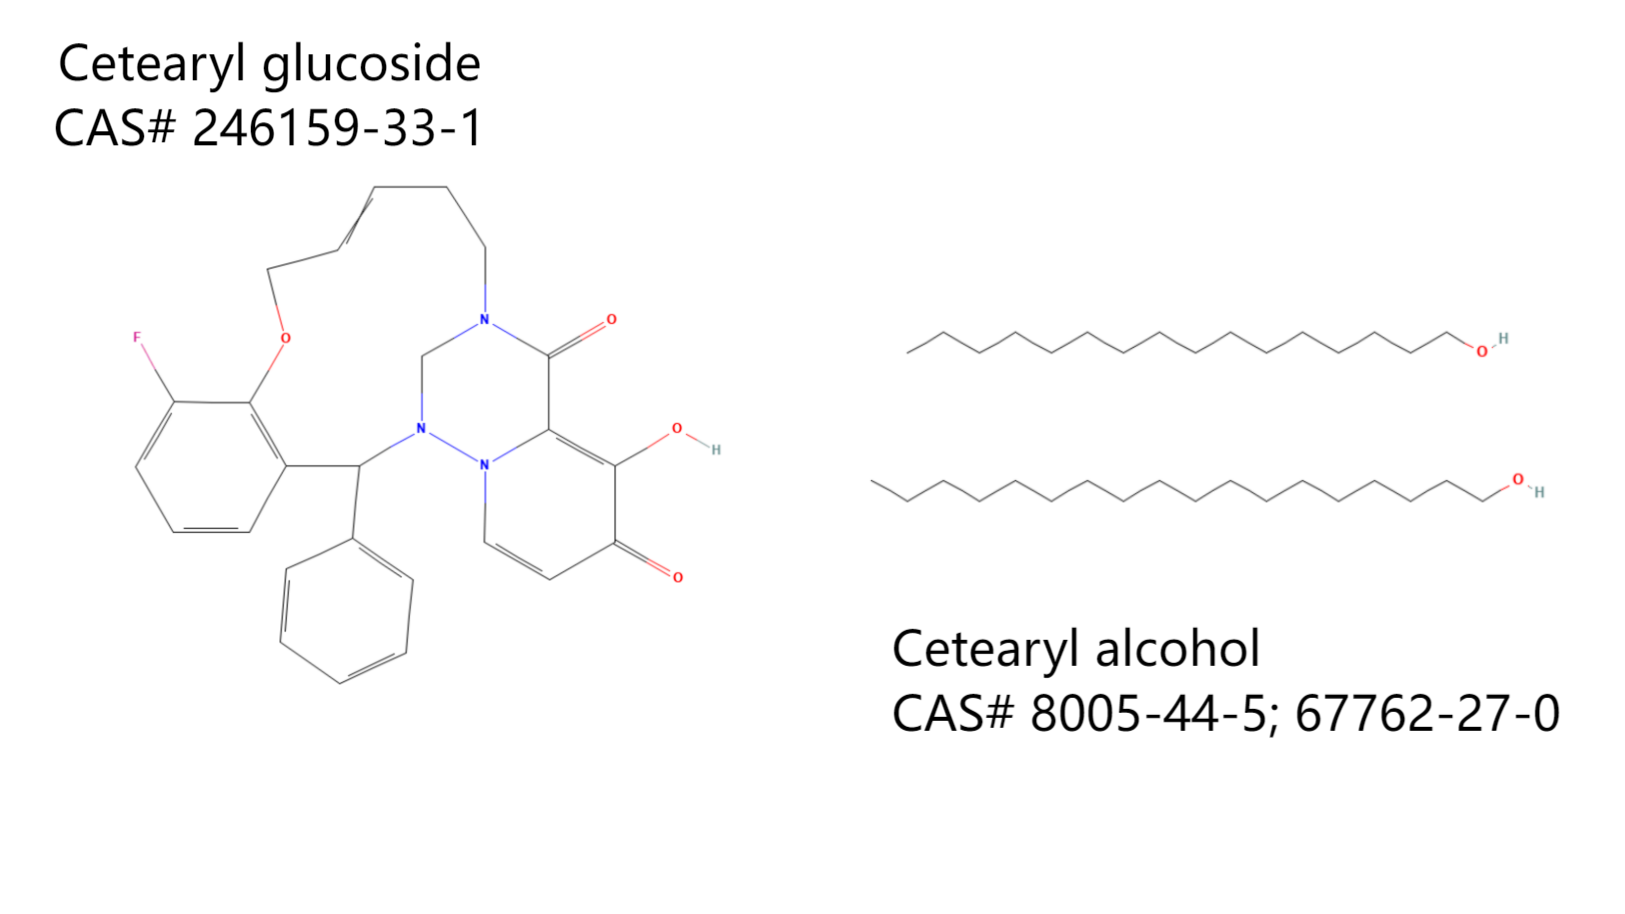 Cetearyl glucoside and Cetearyl alcohol